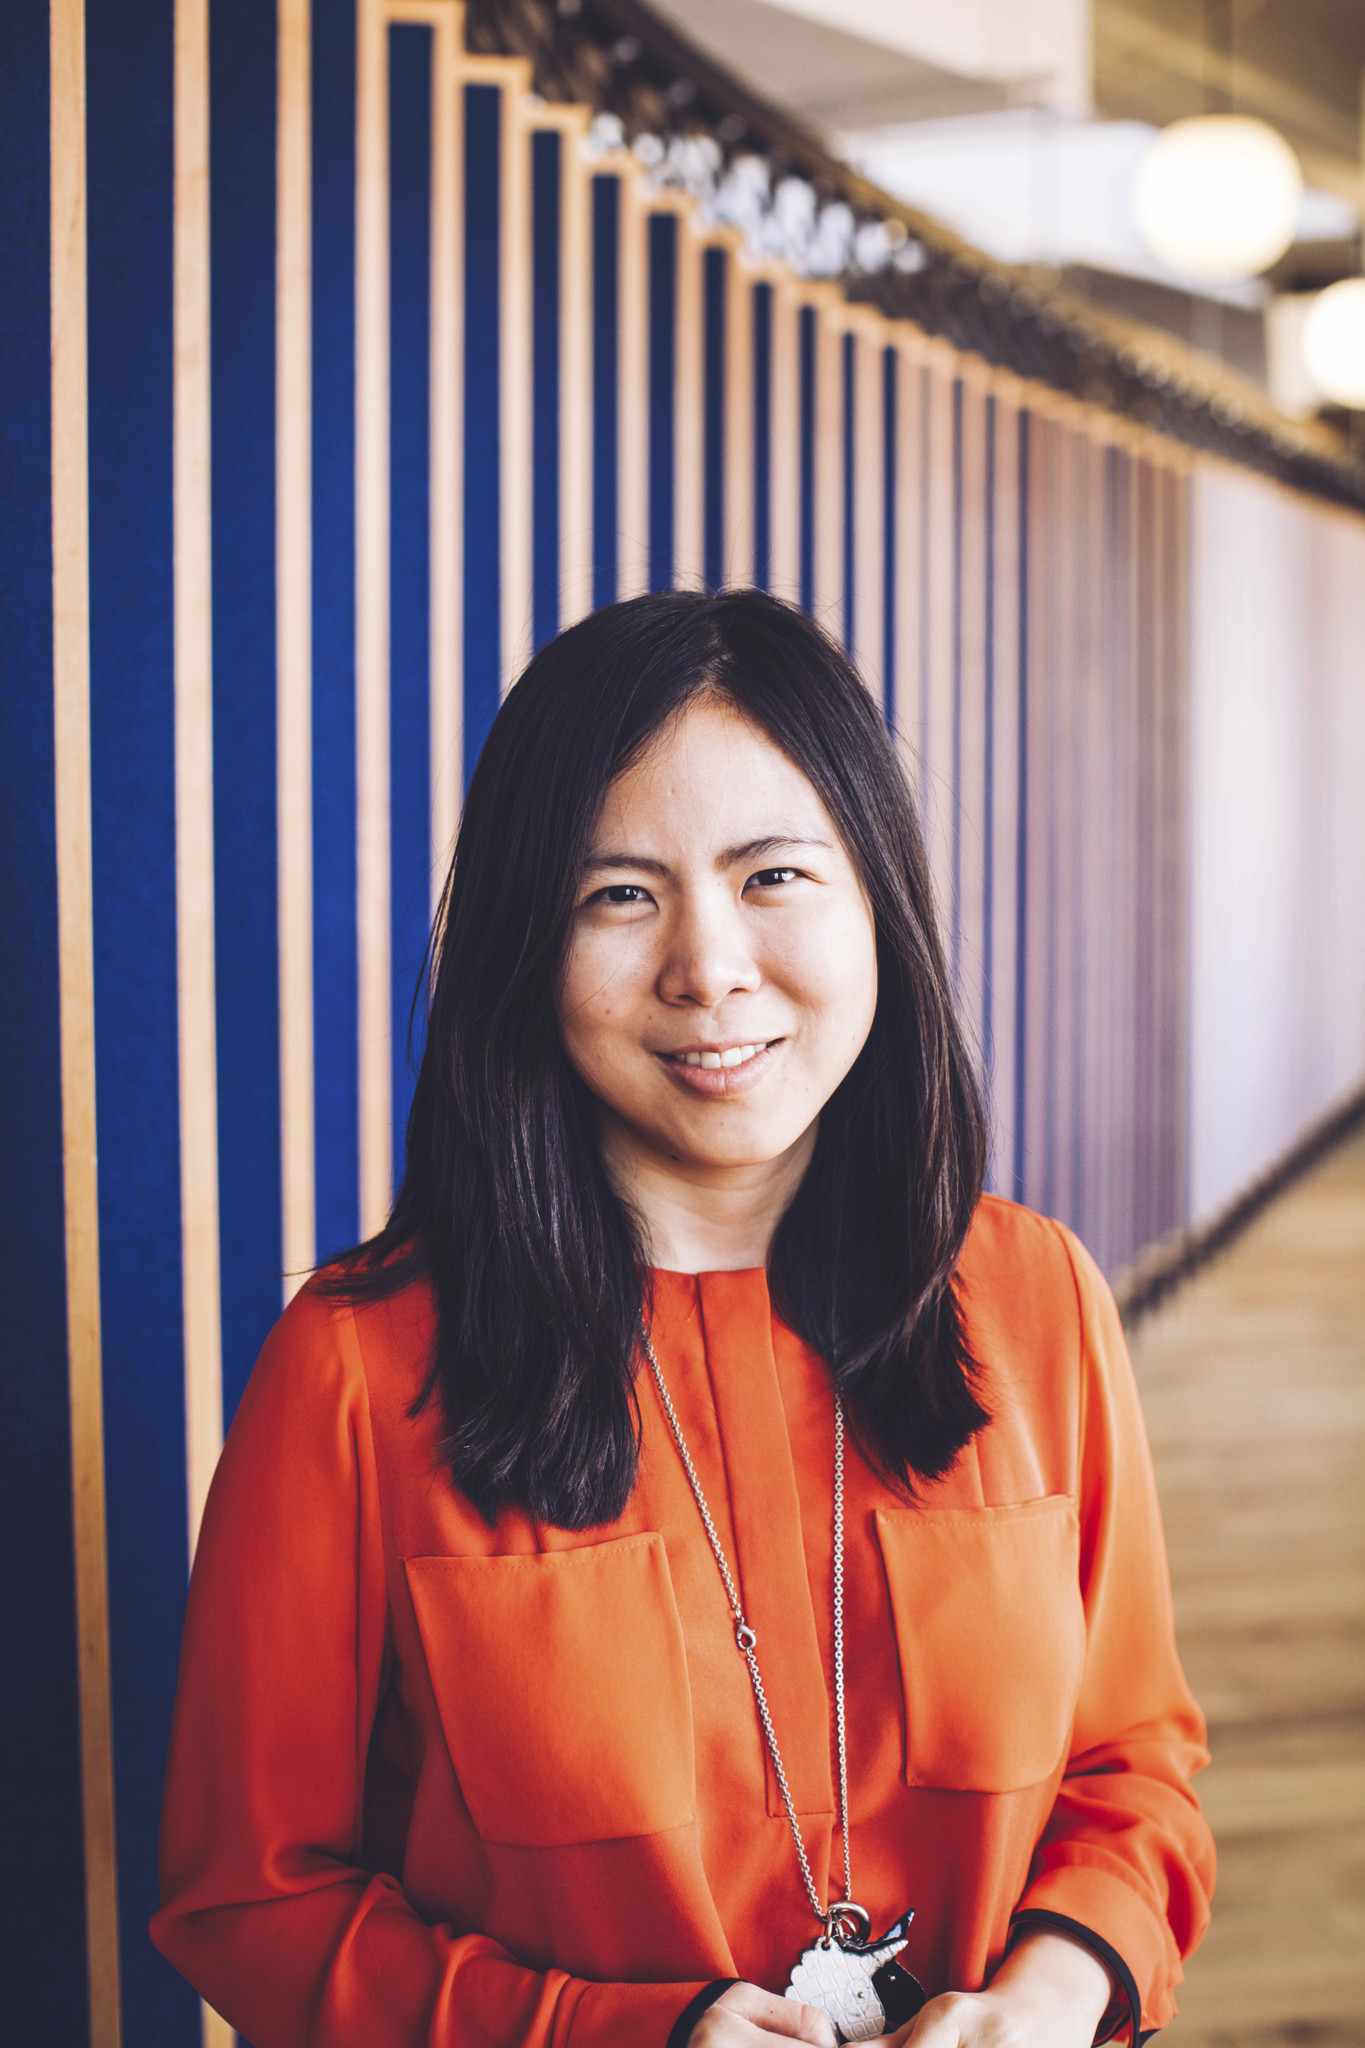 Monica Kang is the founder and CEO of InnovatorsBox